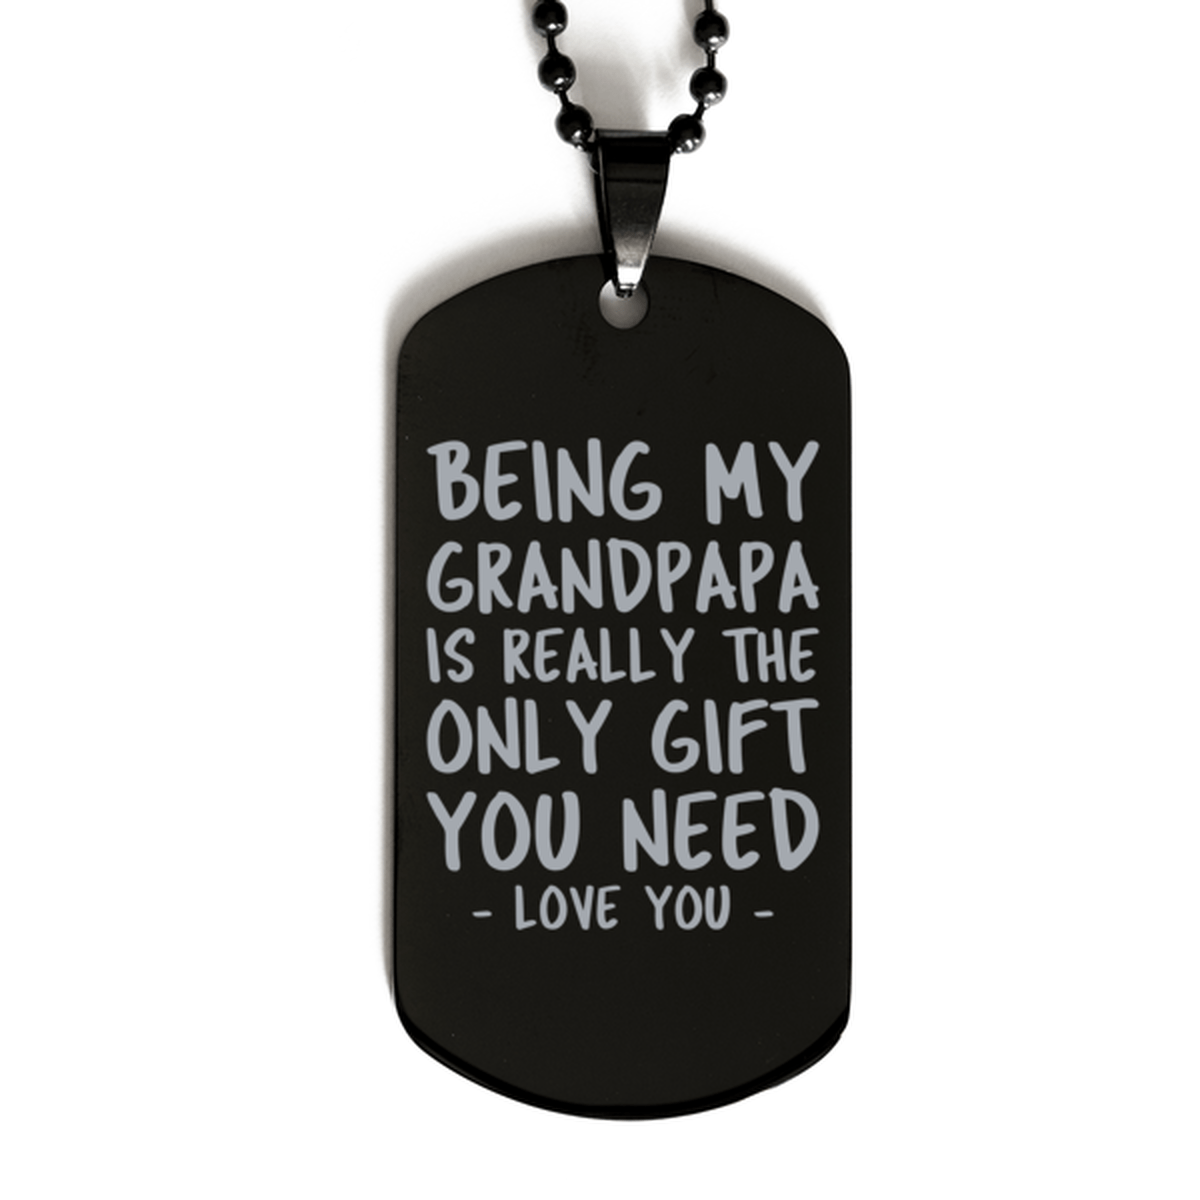 Funny Grandpapa Black Dog Tag Necklace, Being My Grandpapa Is Really the Only Gift You Need, Best Birthday Gifts for Grandpapa